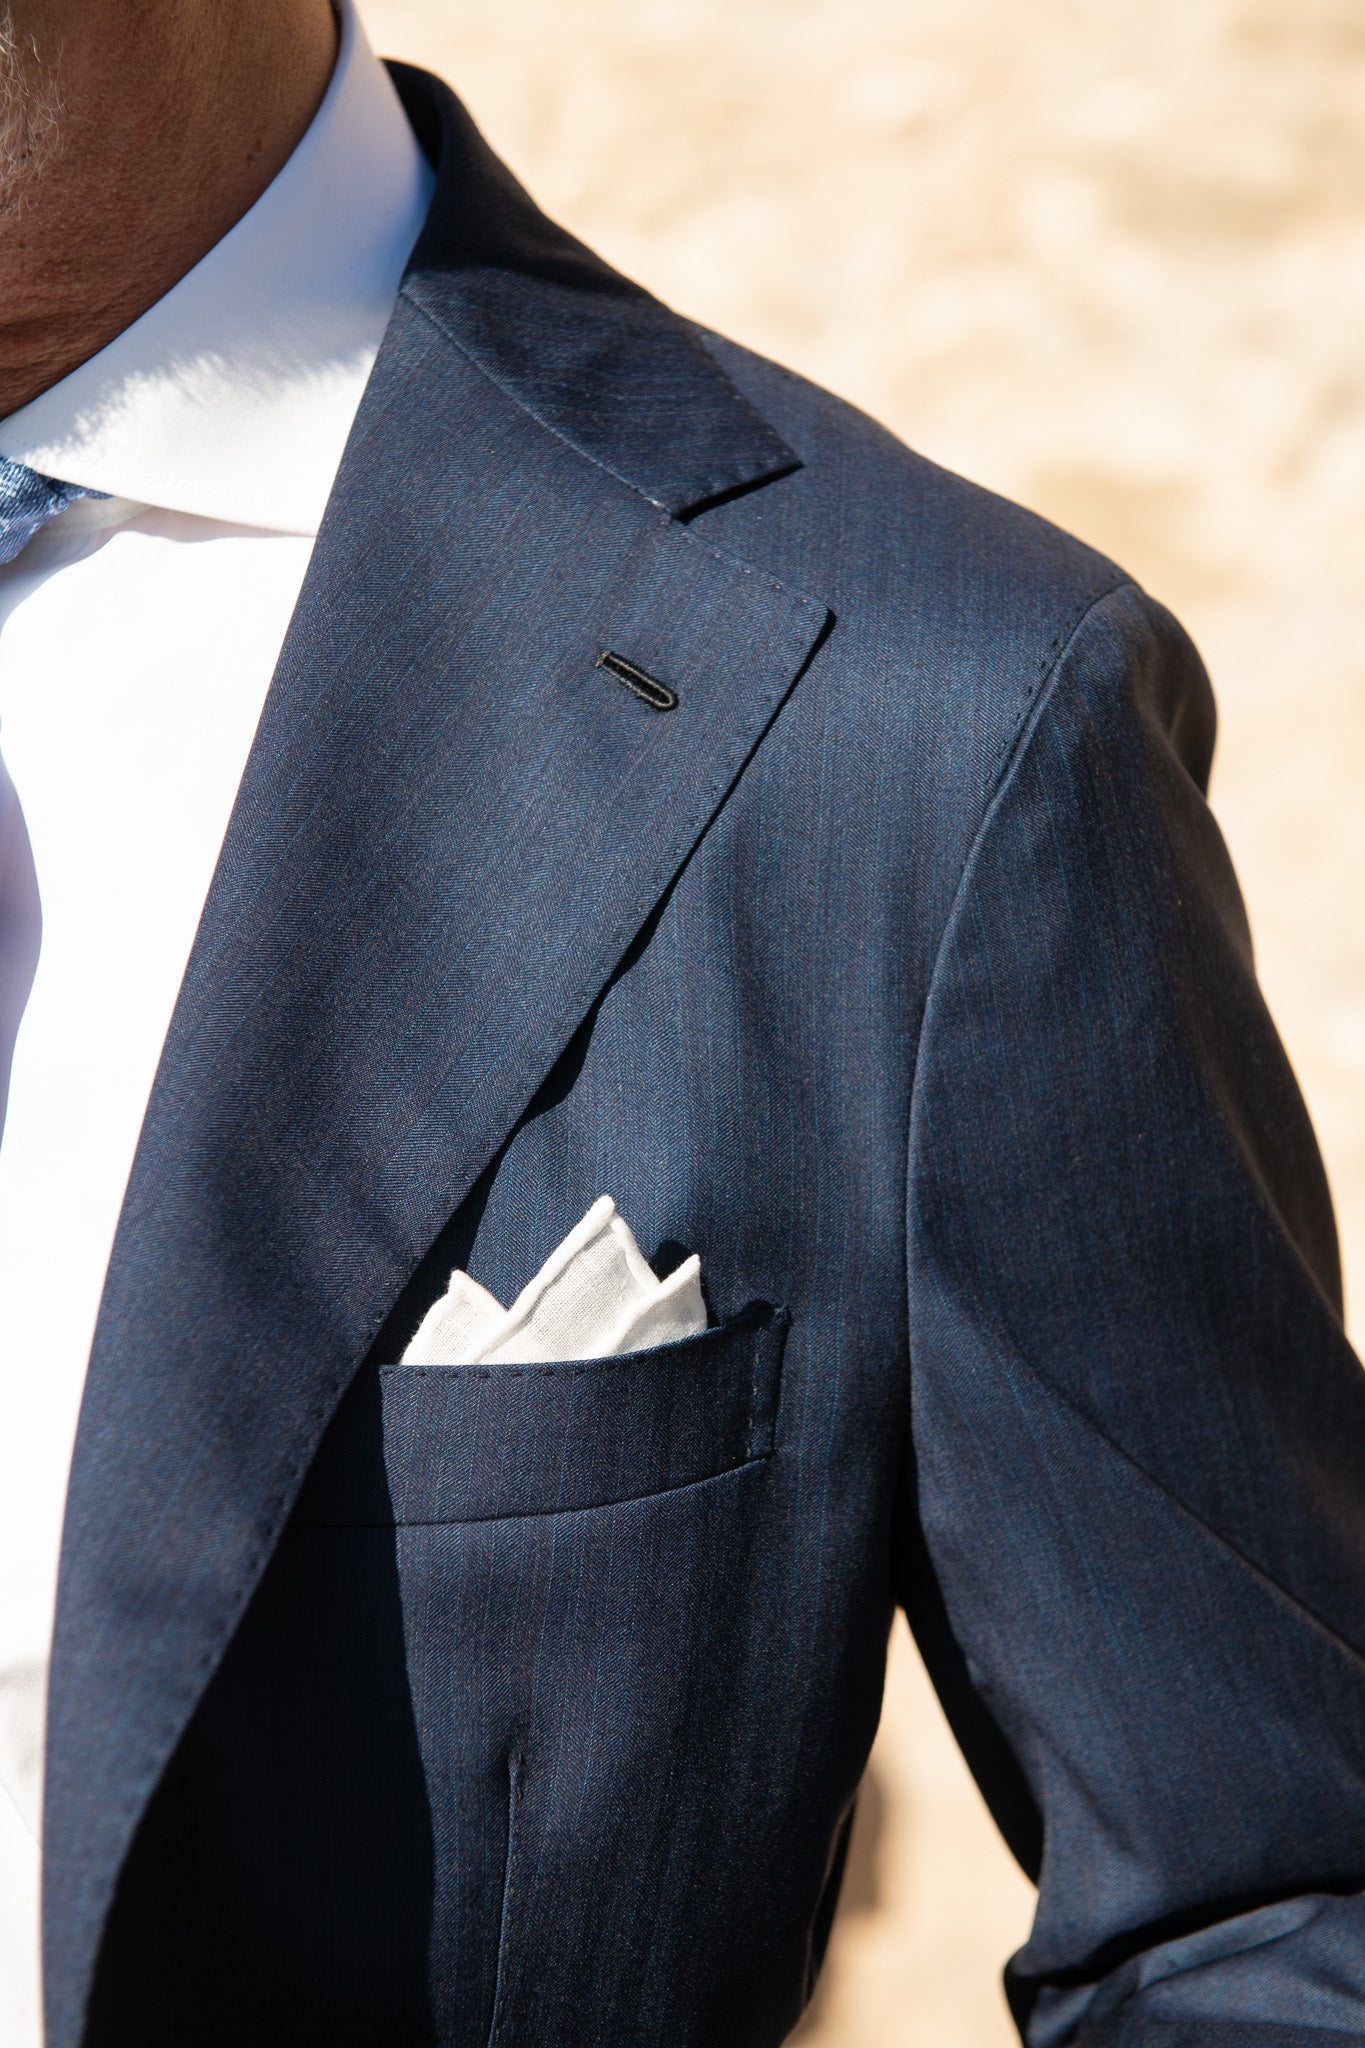 Blue solaro suit - Made in Italy